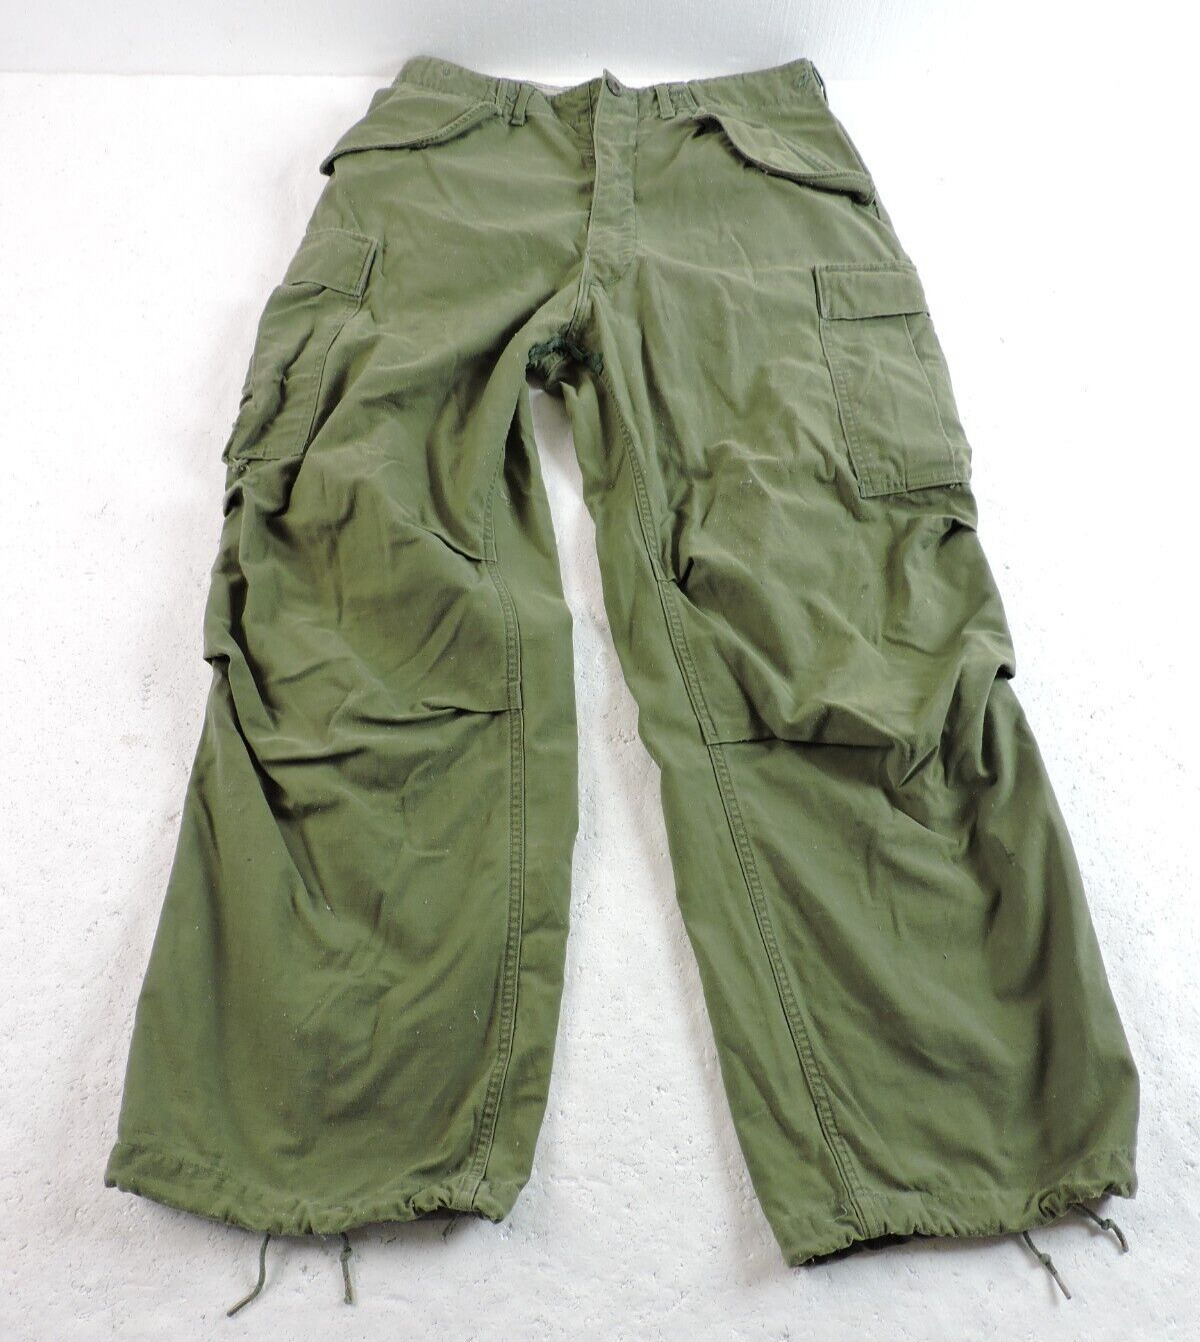 Winfield Vintage Cold Weather Pants Trousers Army 107 Olive Green Small Regular